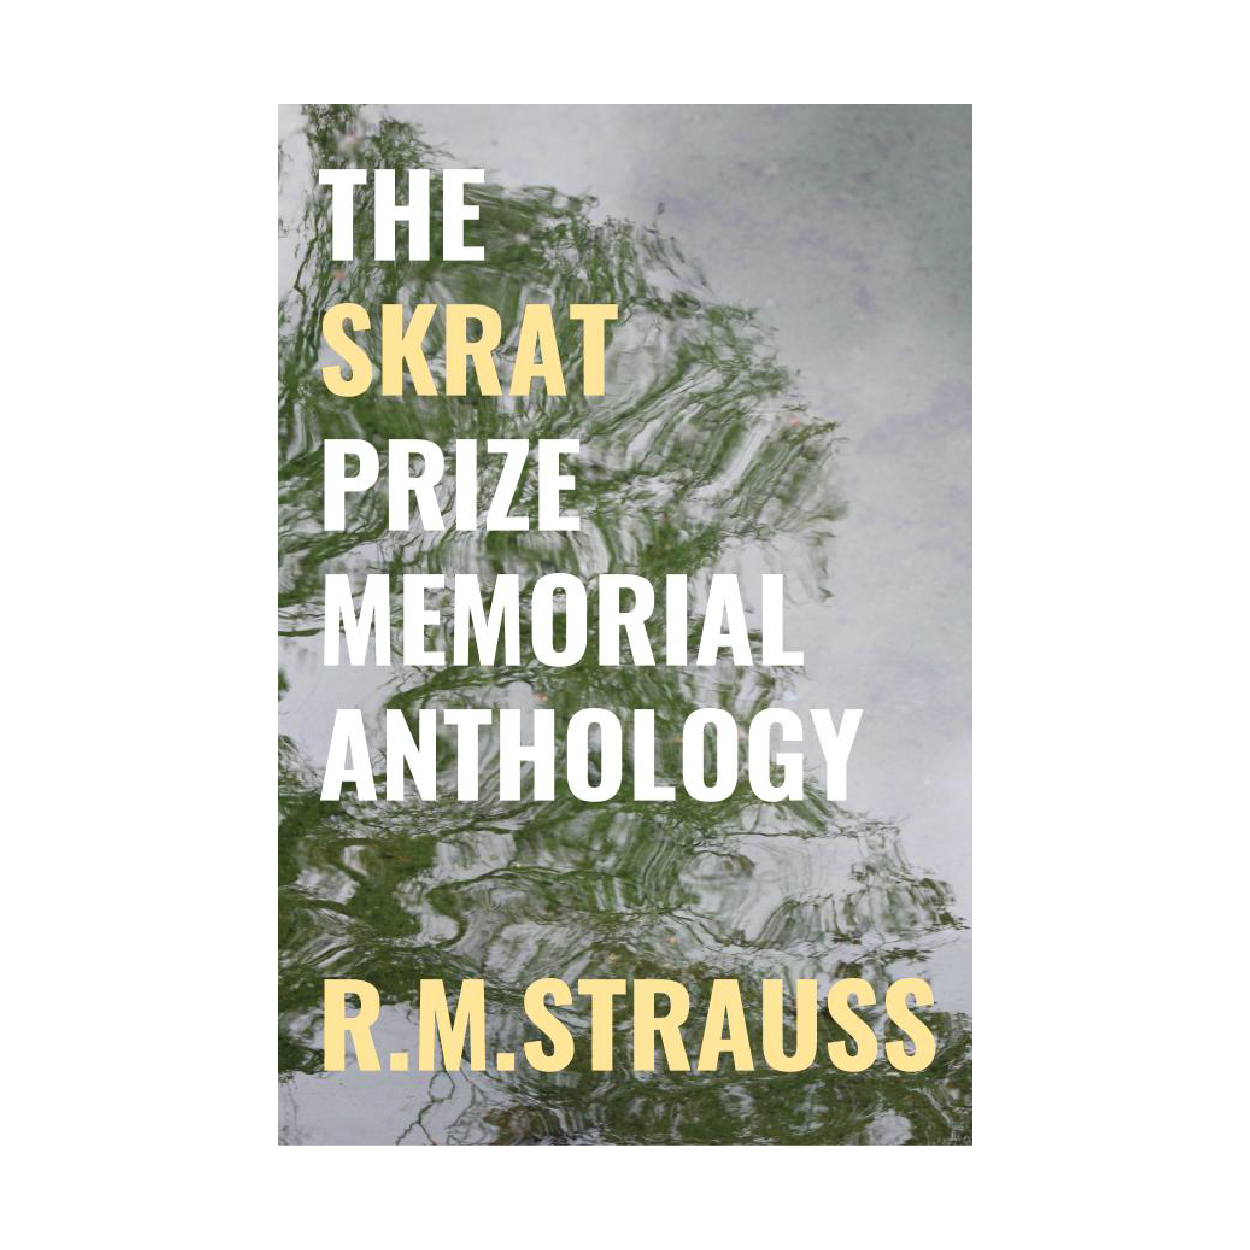 The Skrat Prize Memorial Anthology (Novel) by R. M. Strauss